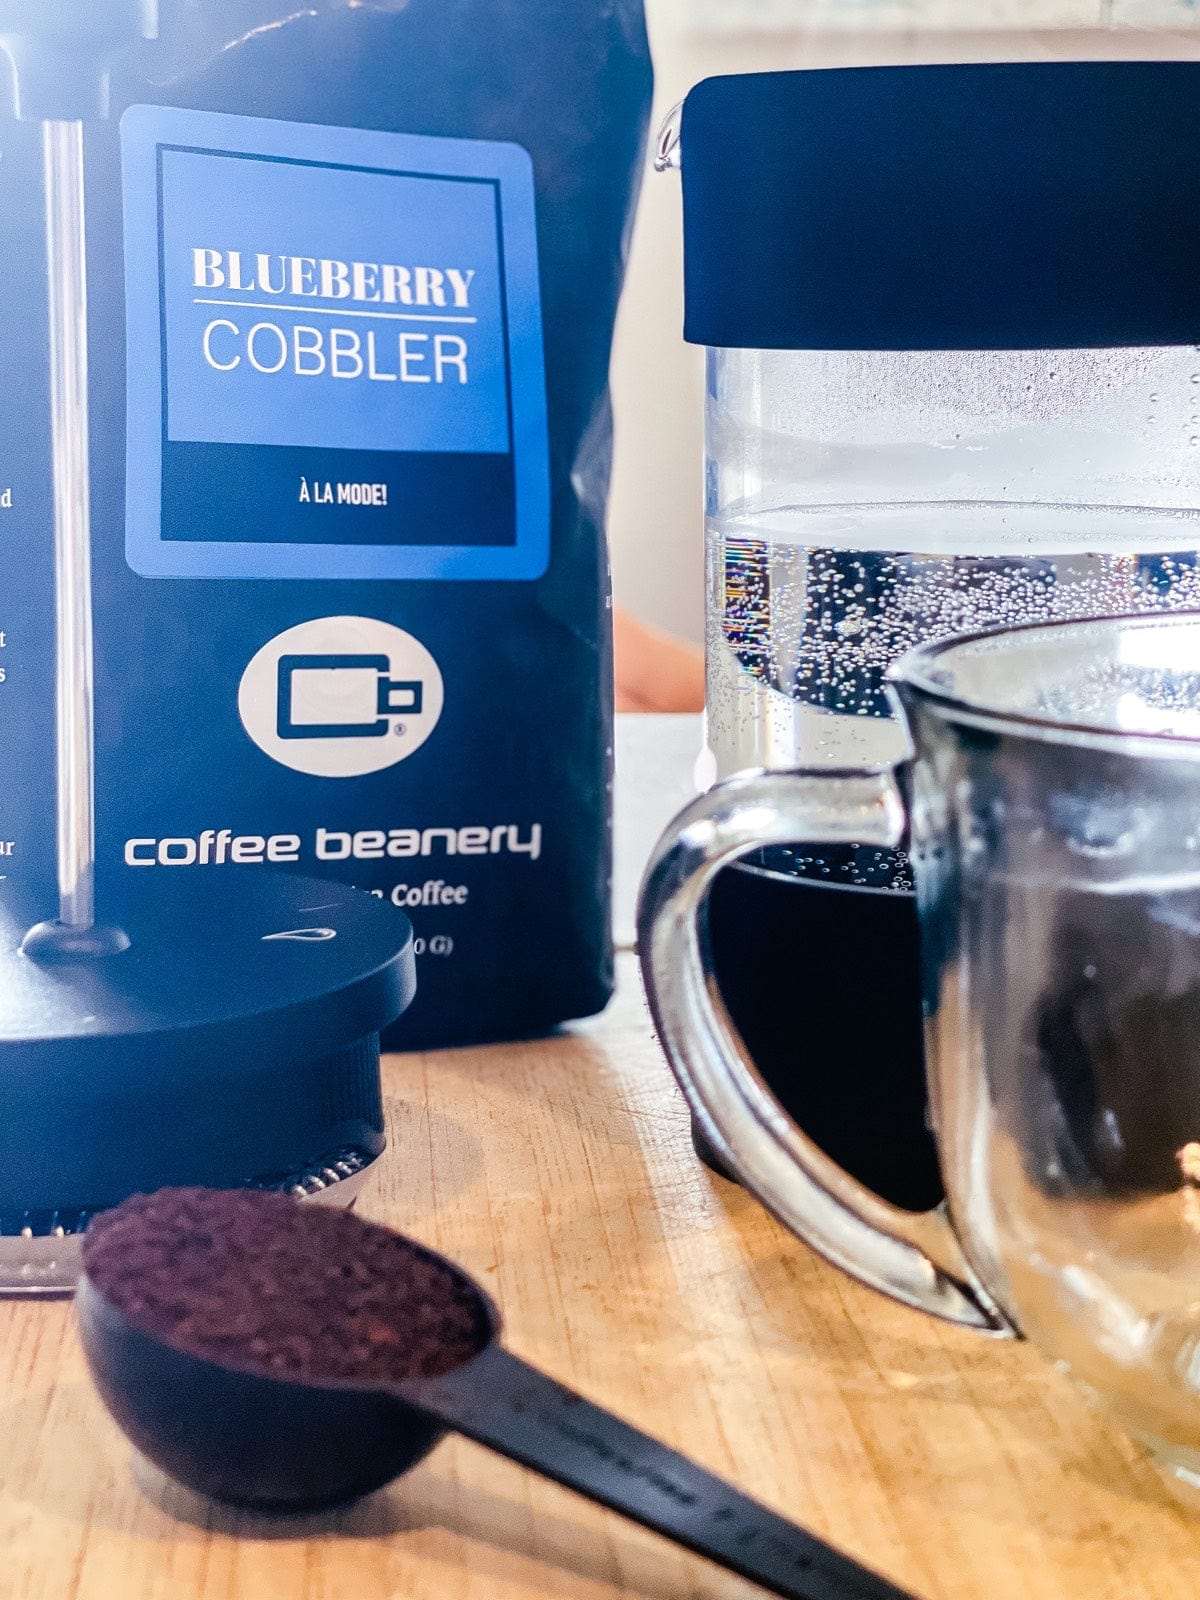 Coffee Beanery Flavored Coffee Blueberry Cobbler Flavored Coffee